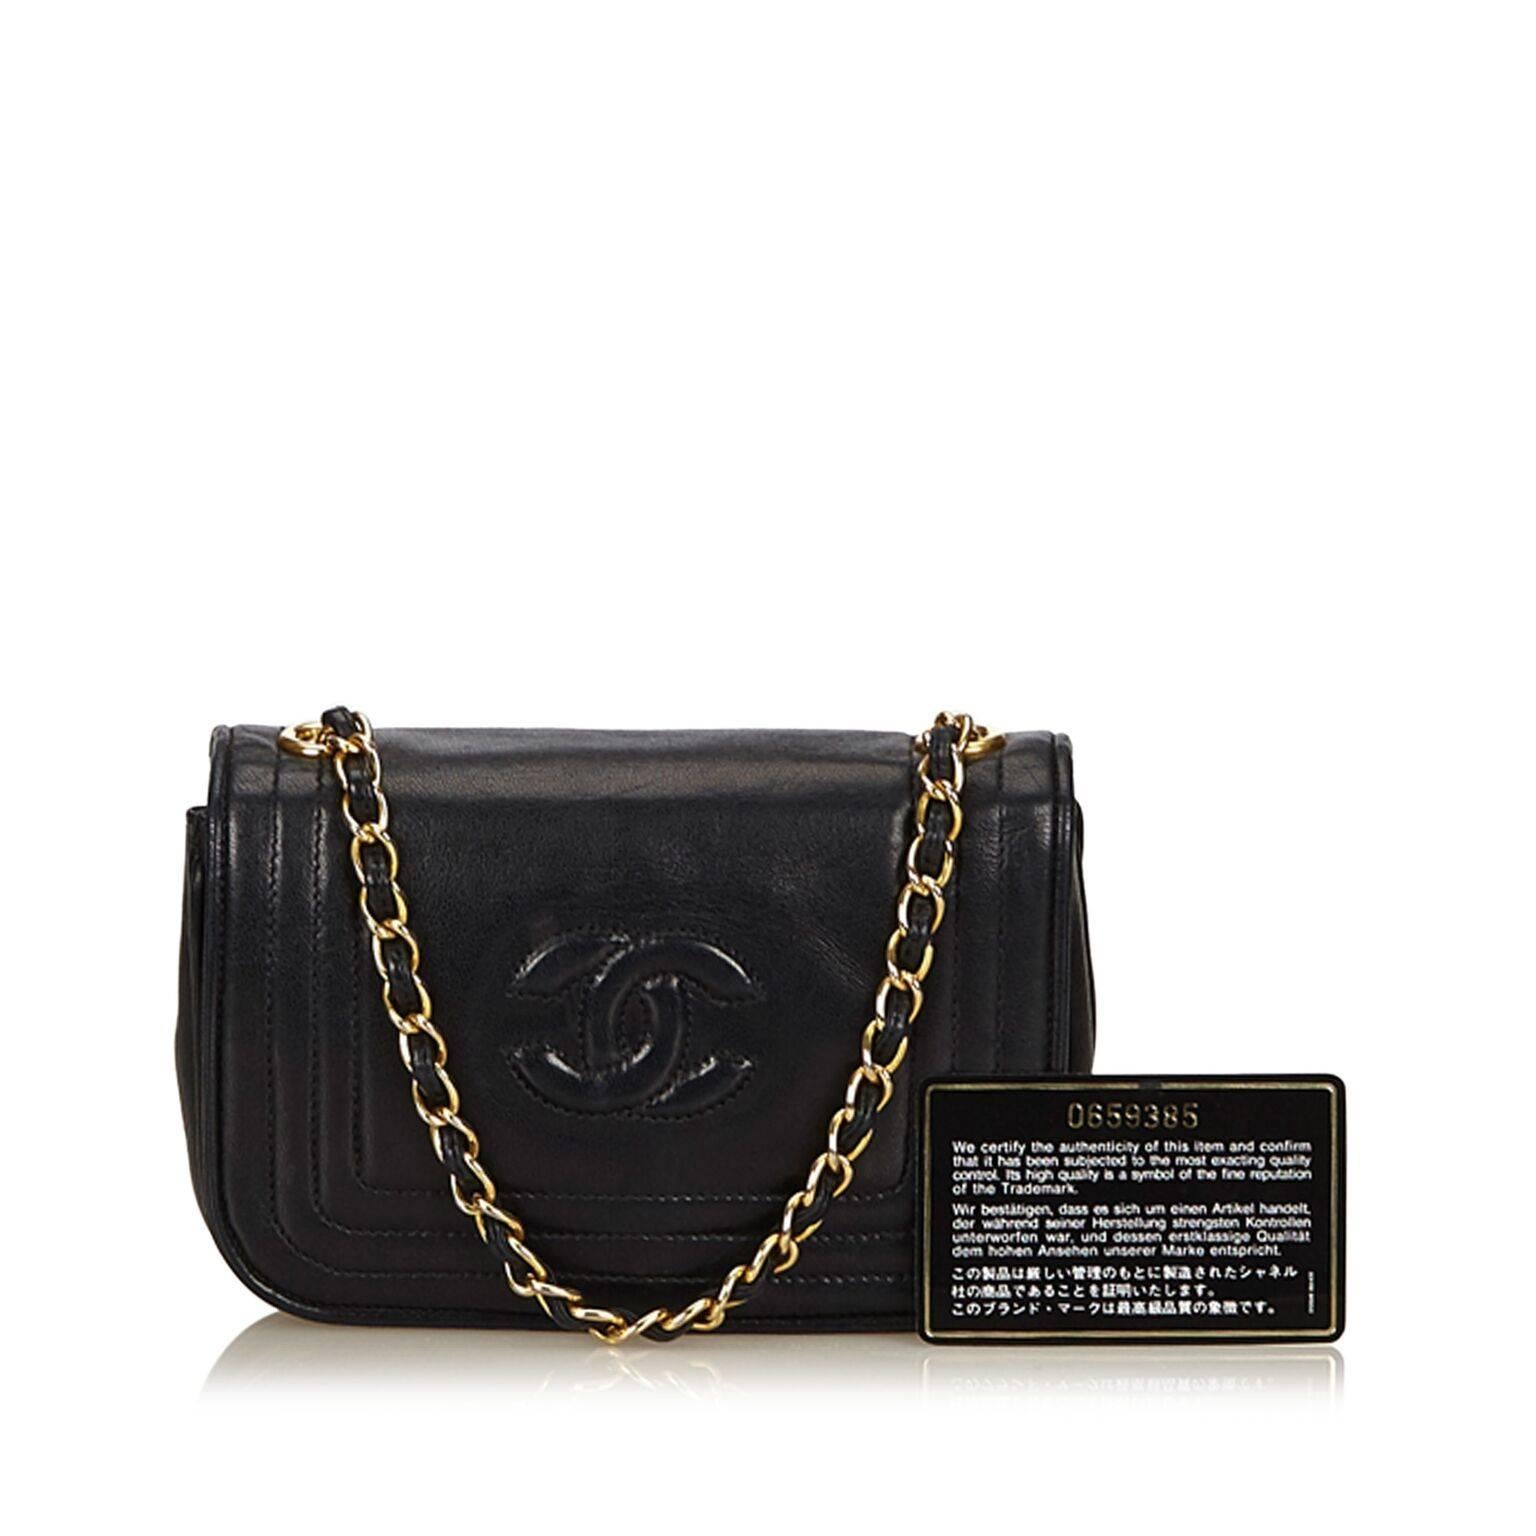 Product details:  Black lambskin leather flap bag by Chanel.  Single chain shoulder strap.  Front flap with magnetic snap closure.  Leather interior with inner zip pocket.  Goldtone hardware.  7